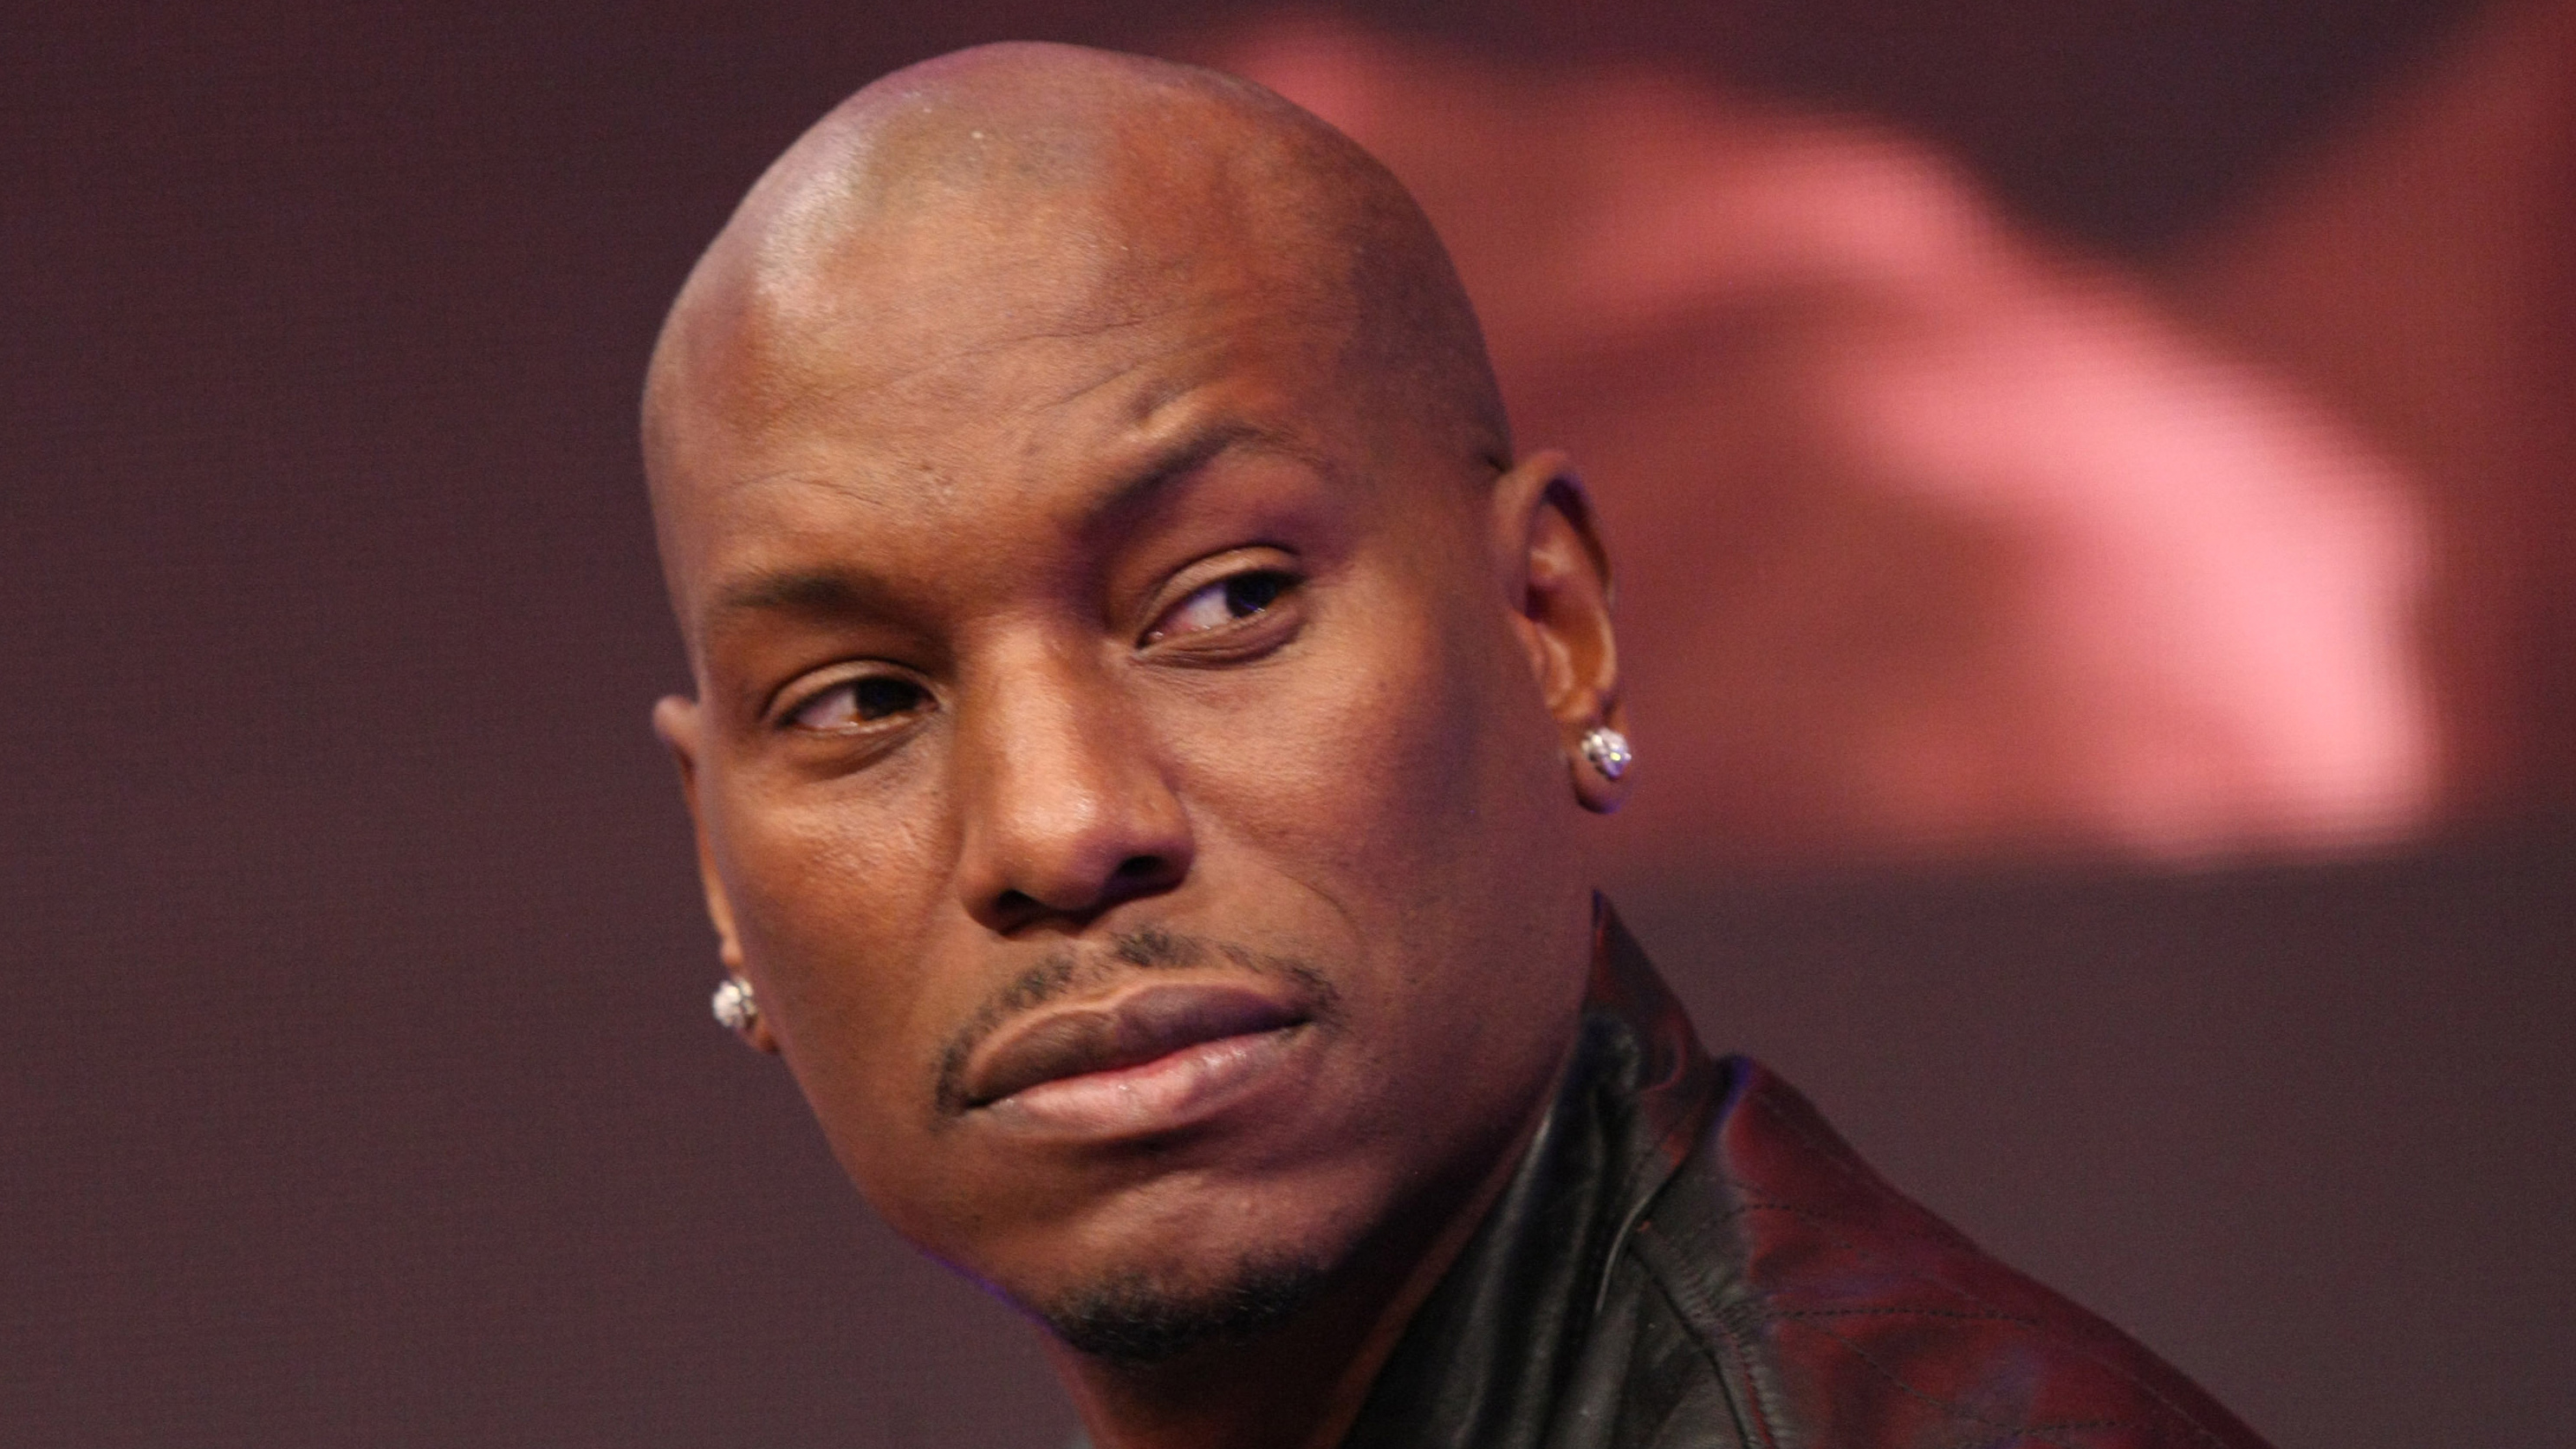 Tyrese Gibson, Fanpop photos, Iconic images, Recognizable face, 2980x1680 HD Desktop